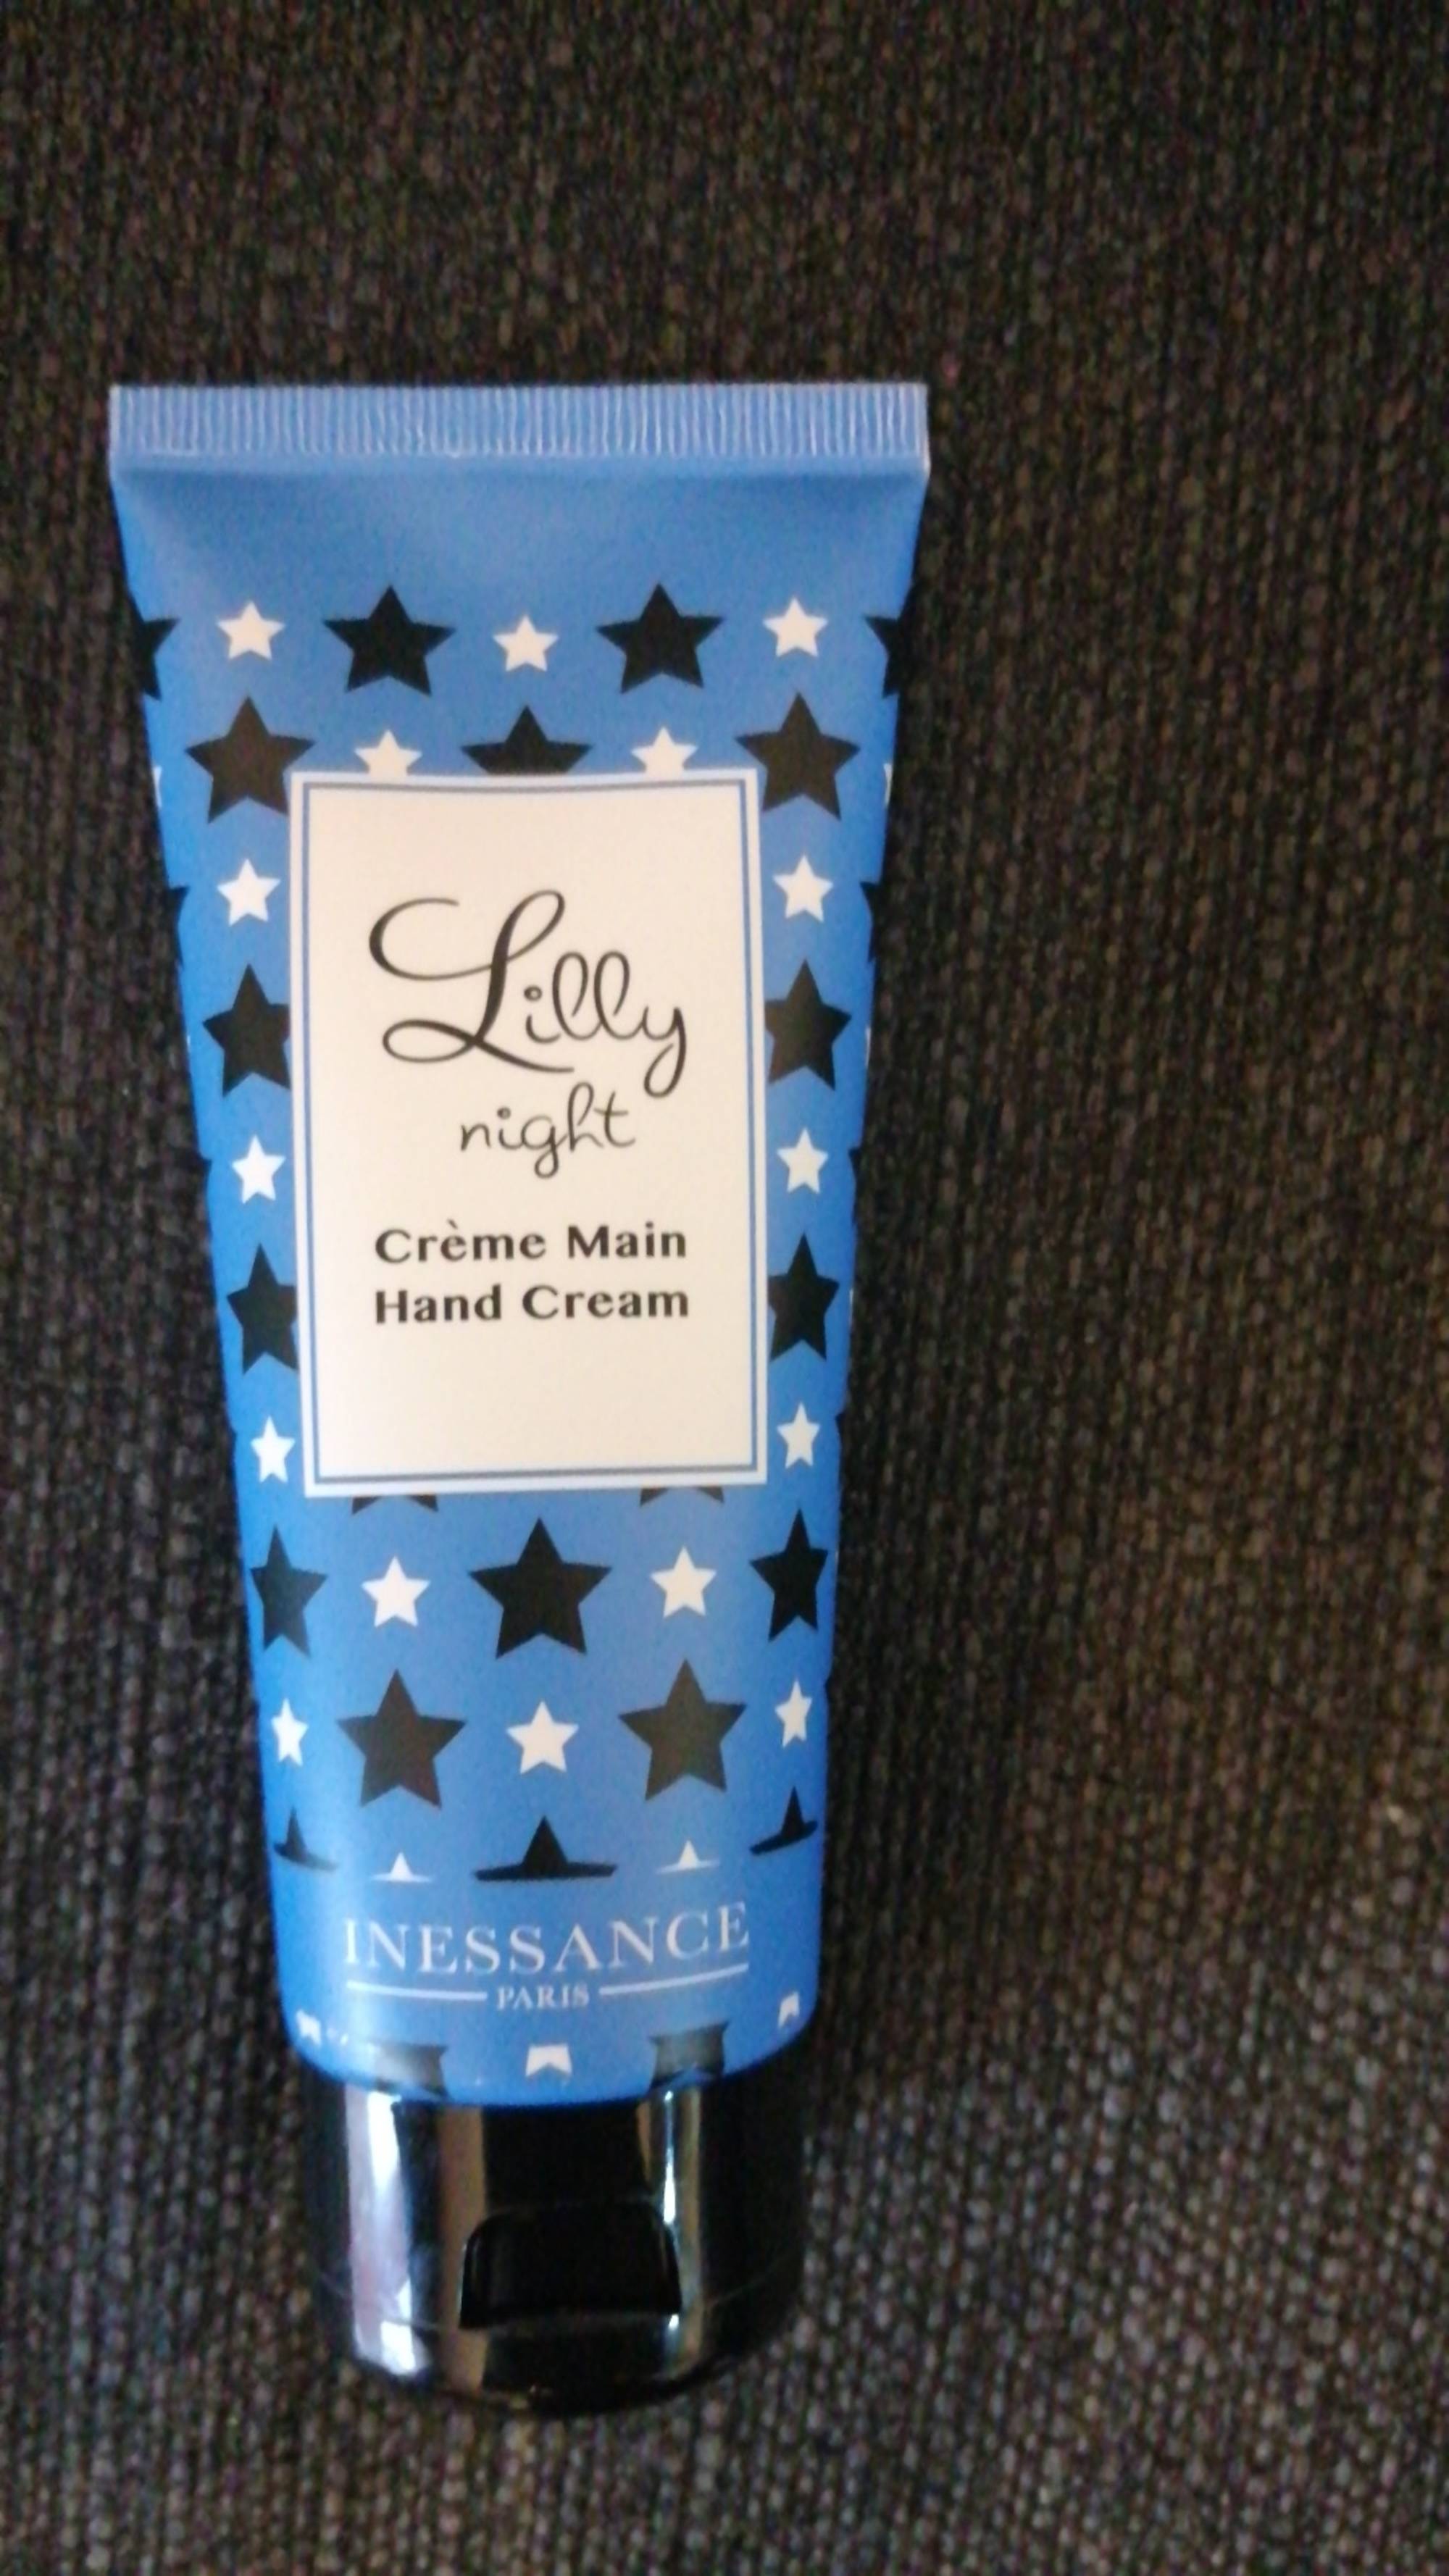 INESSANCE - Lilly night - Crème main